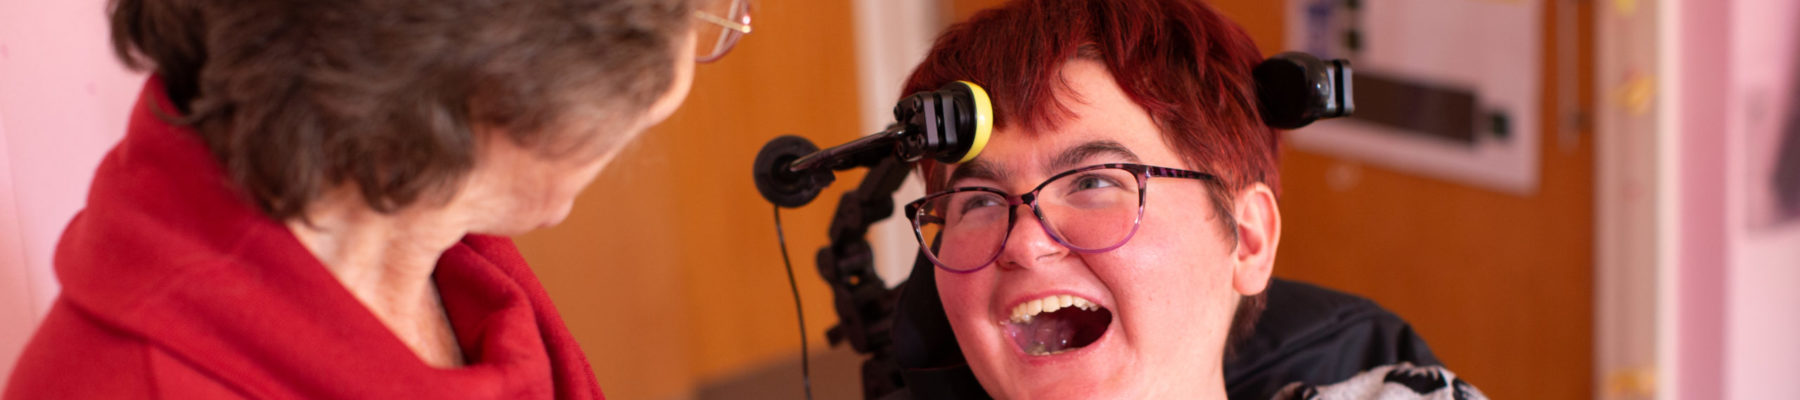 Sally, a white woman with short hair, smiling while communicating with her intervenor.